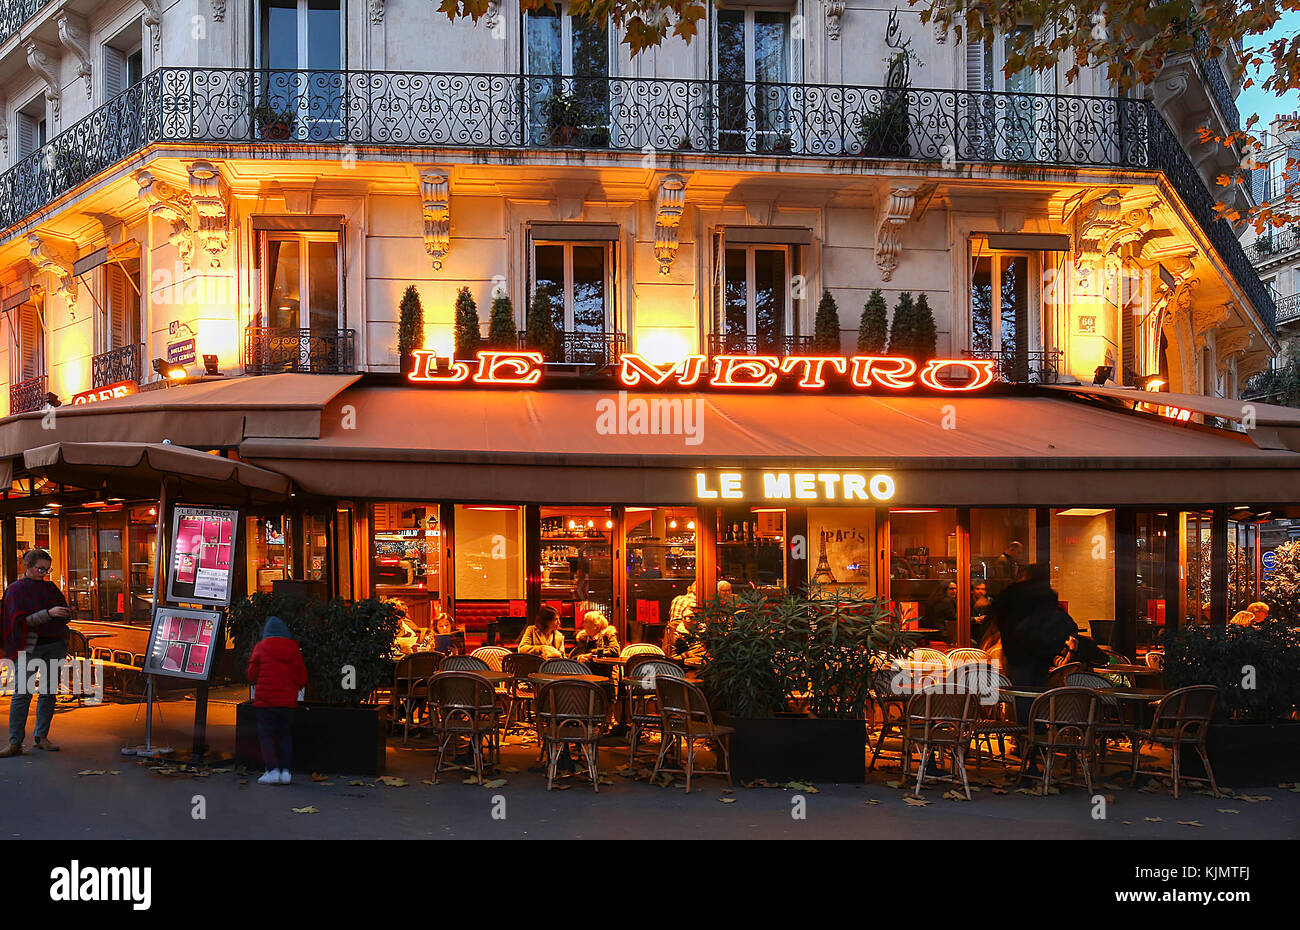 Le Metro is a typical Parisian cafe located on Saint Germain boulevard ...